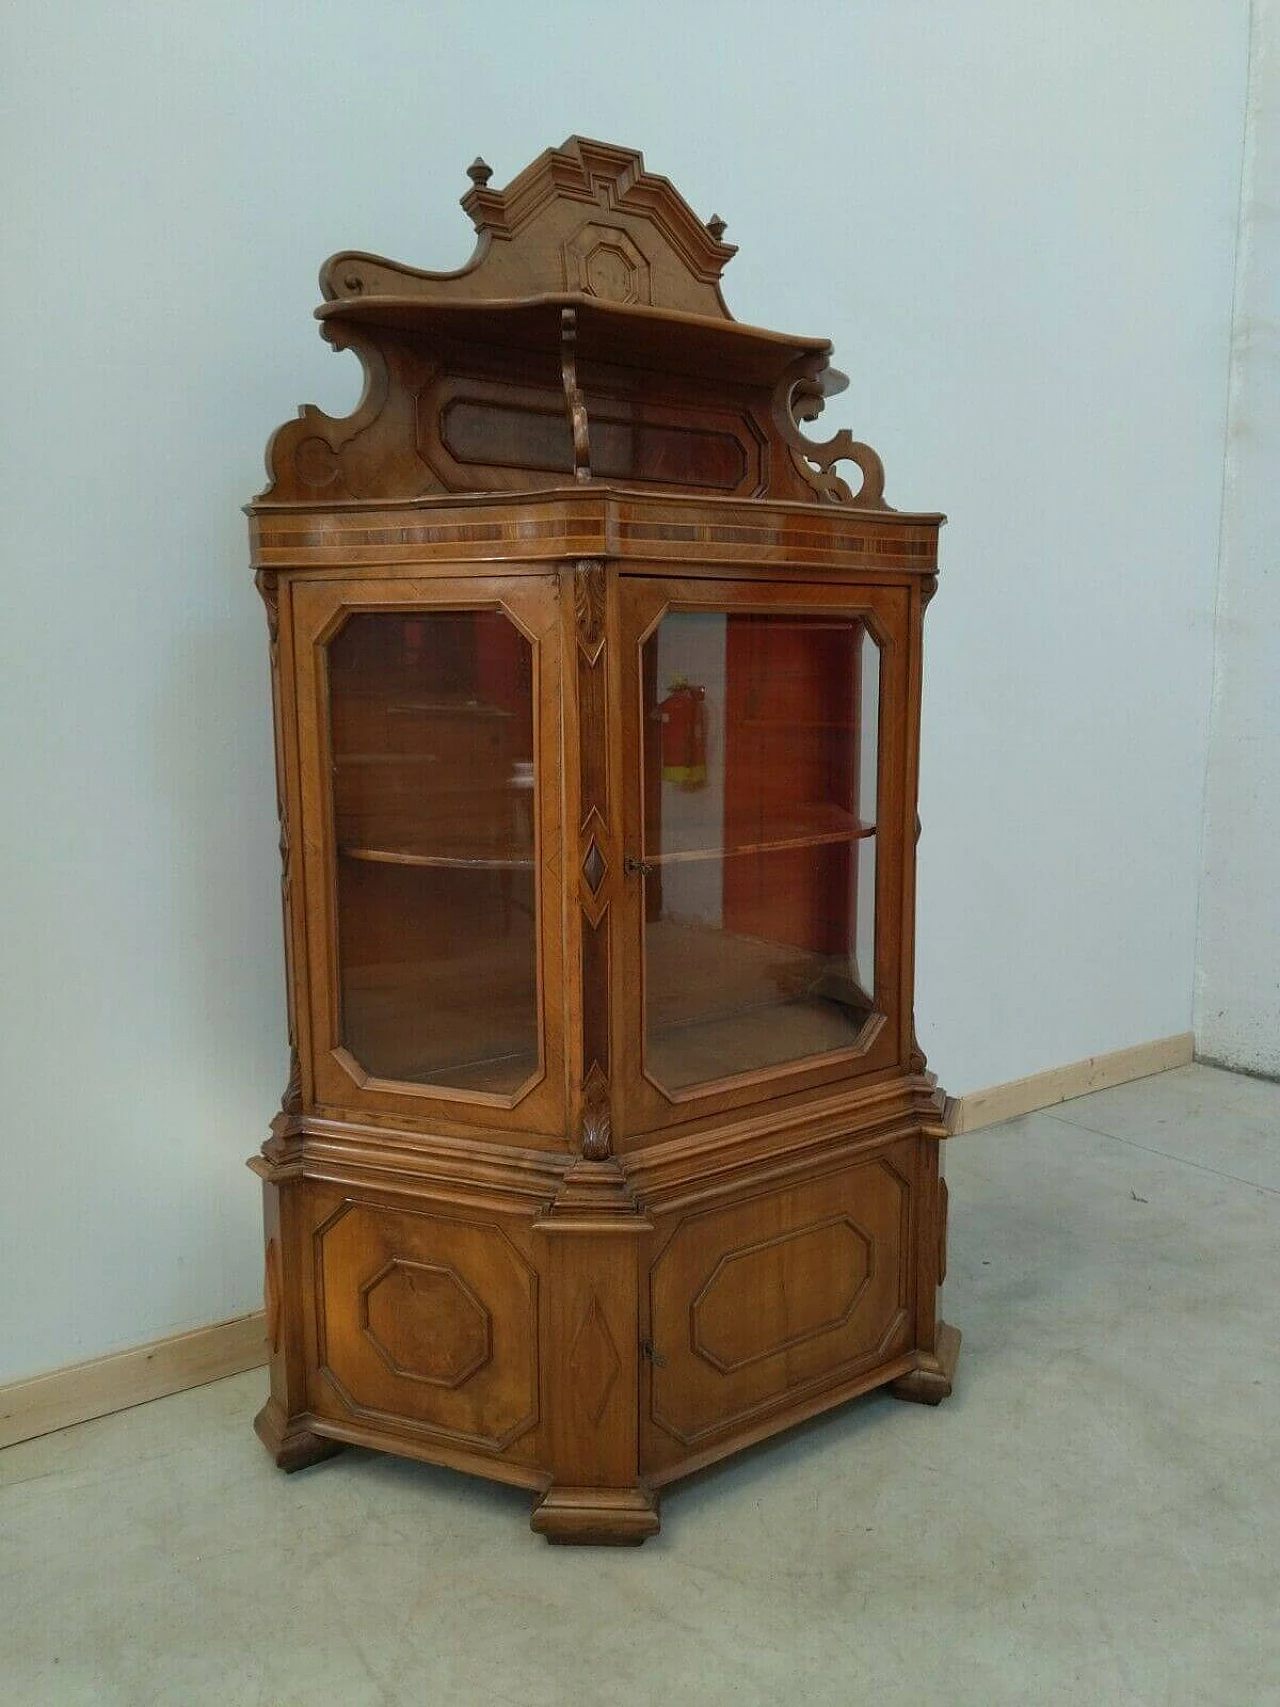 Two-part display case in walnut, spruce and glass, 19th century 1477114